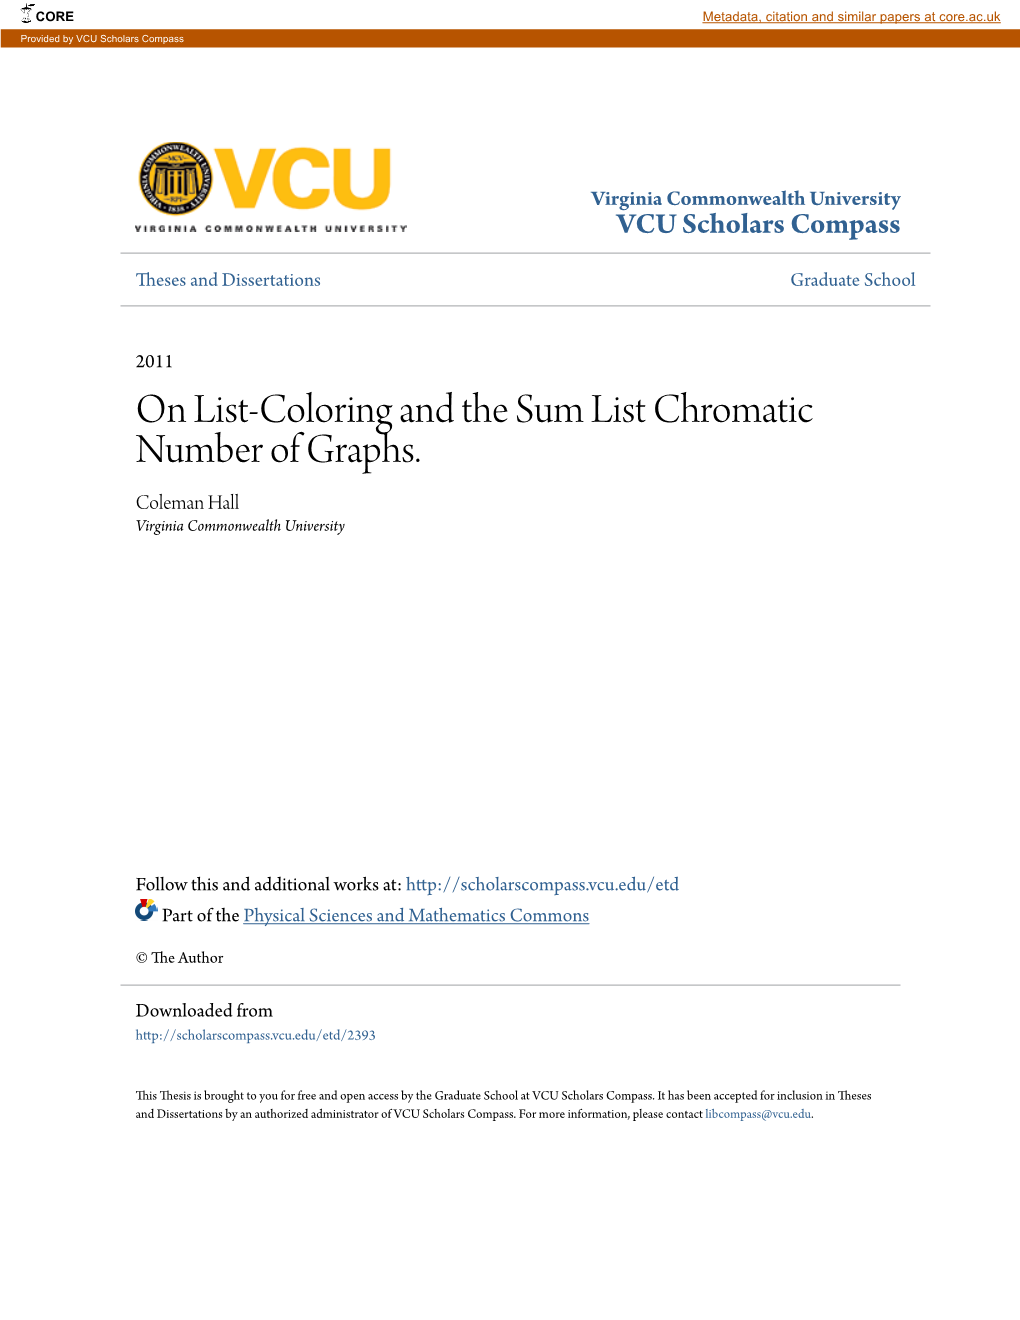 On List-Coloring and the Sum List Chromatic Number of Graphs. Coleman Hall Virginia Commonwealth University